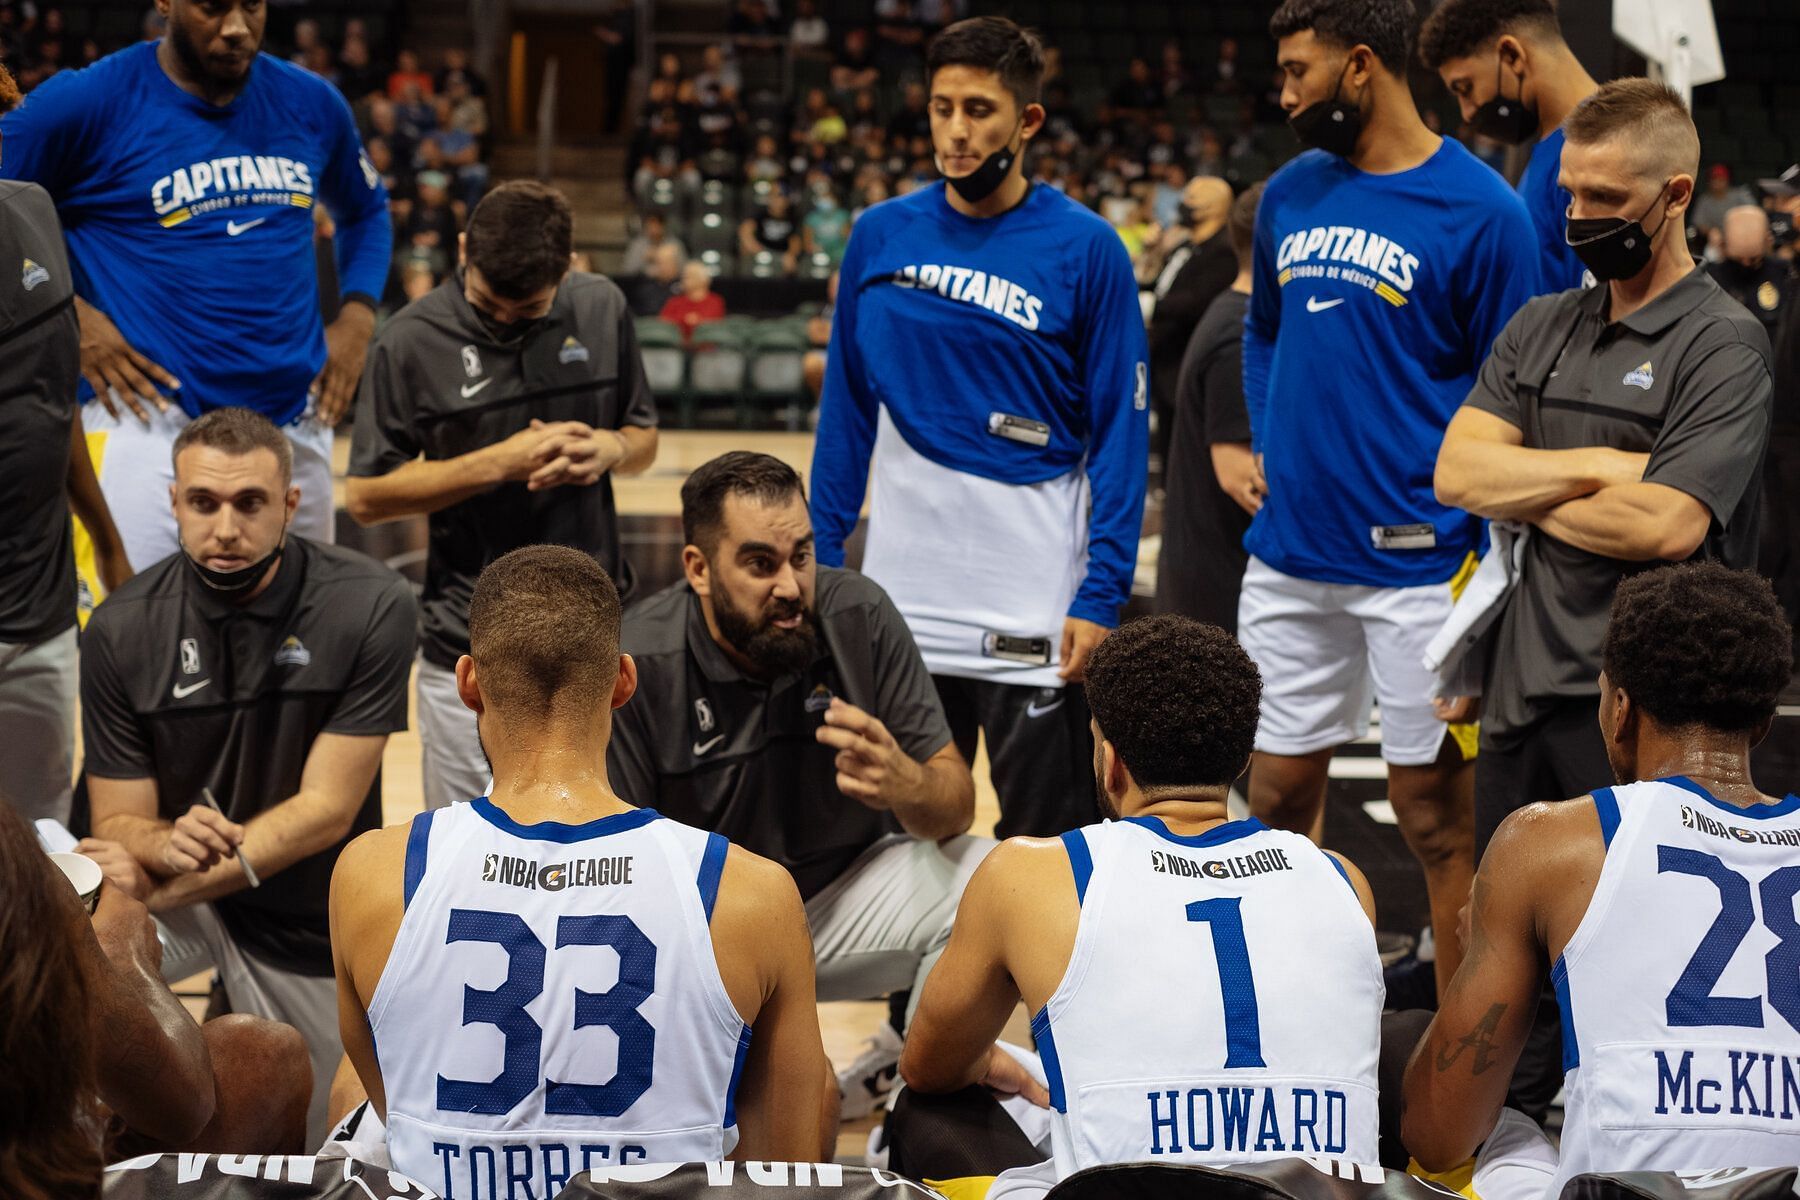 G League team Mexico City Capitanes bench during a timeout [Source: The New York Times]